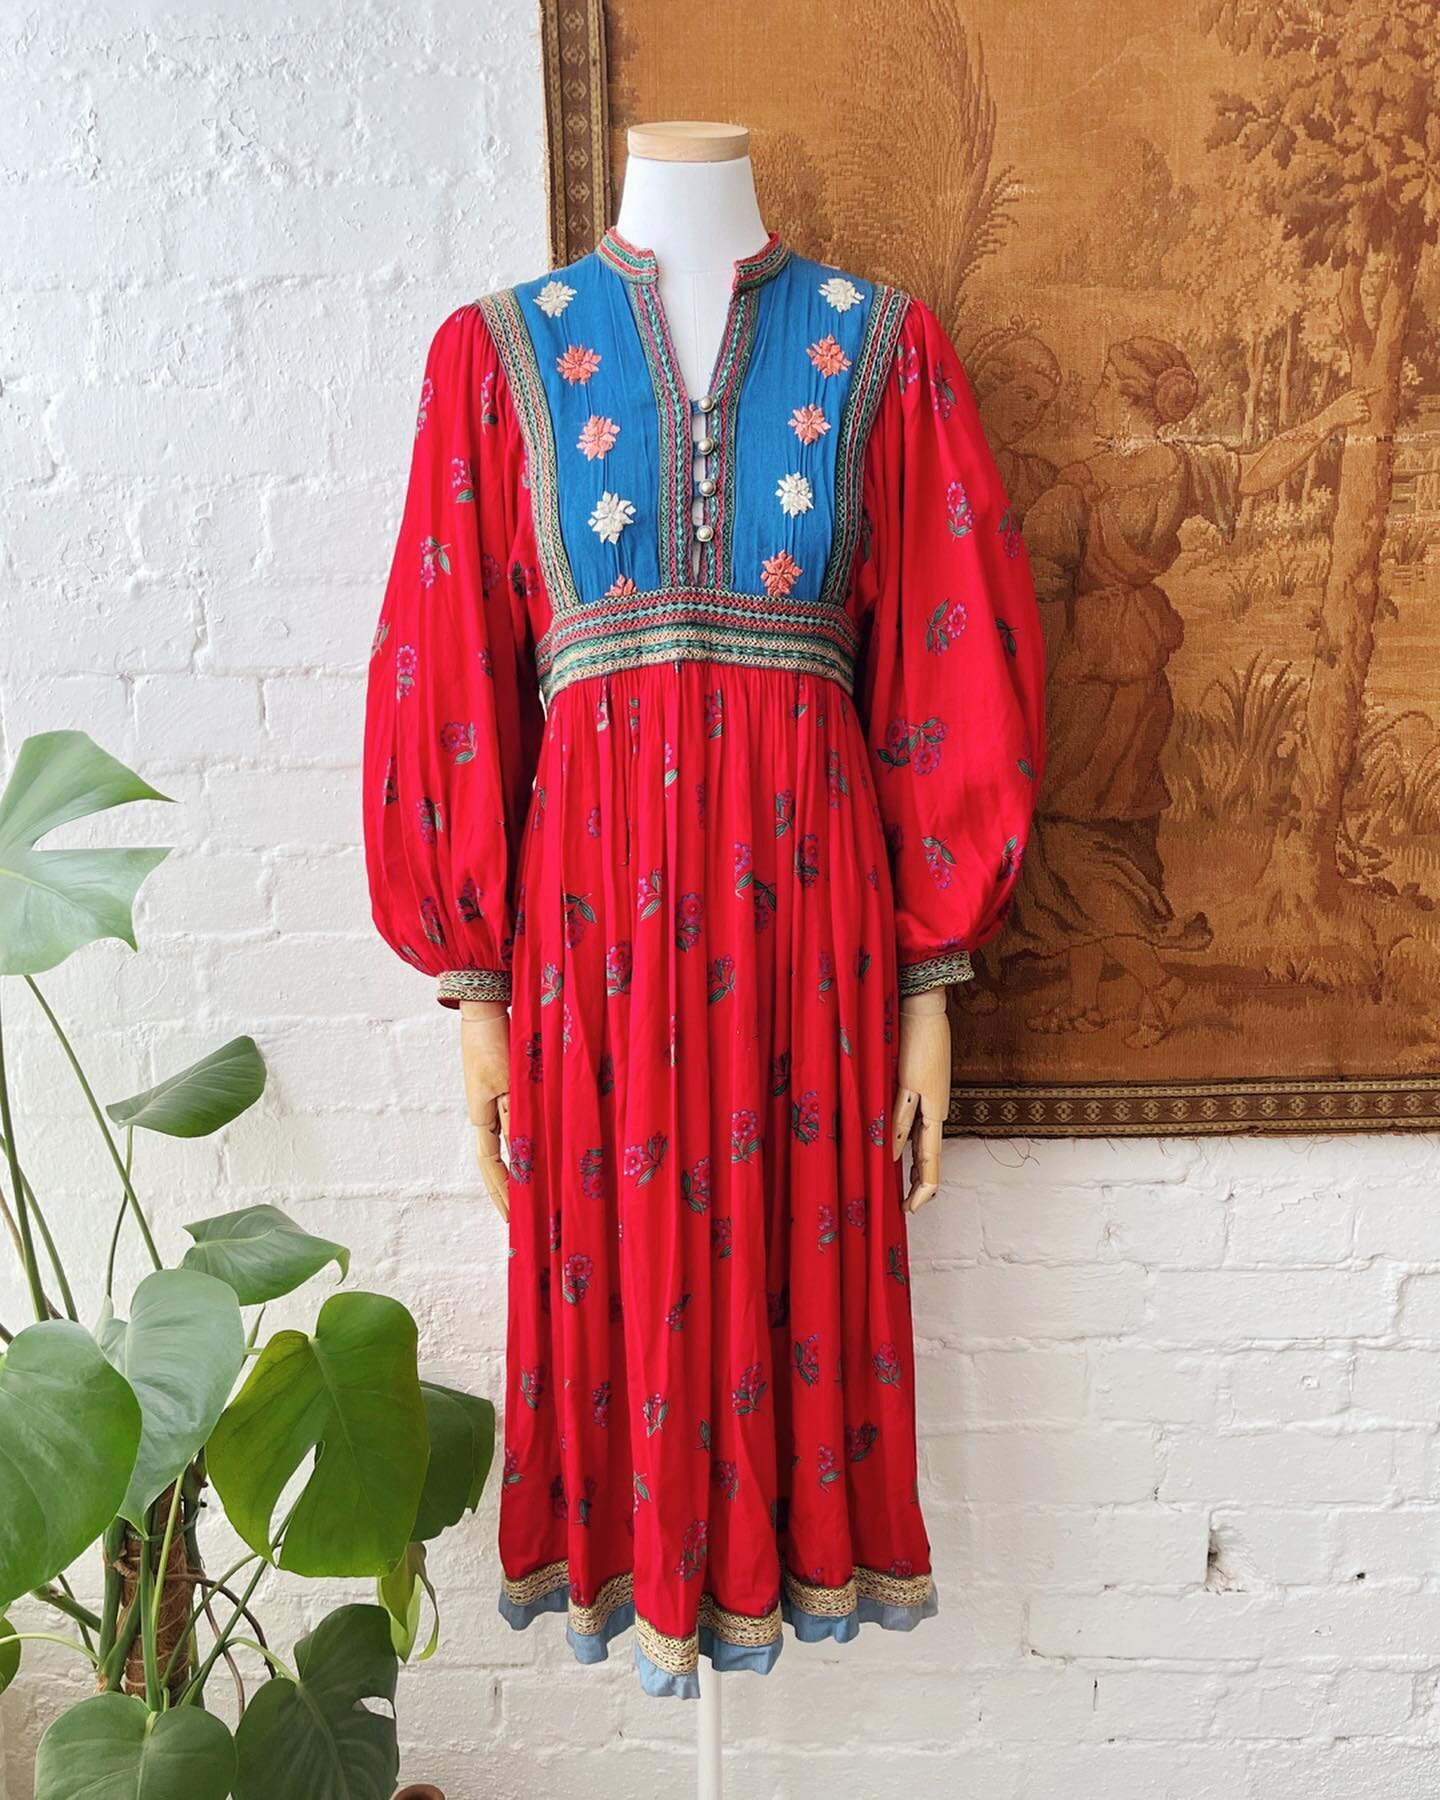 Beautiful 1970s heavily embroidered Afghan dress available shortly on the website 🌹
.
.
#cordialvintage #afghandress #vintageafghan #vintageafghandress #vintagemonsoon #janetwood #vintageembroidery #embroidery #embroidereddress #vintagedress #bristo